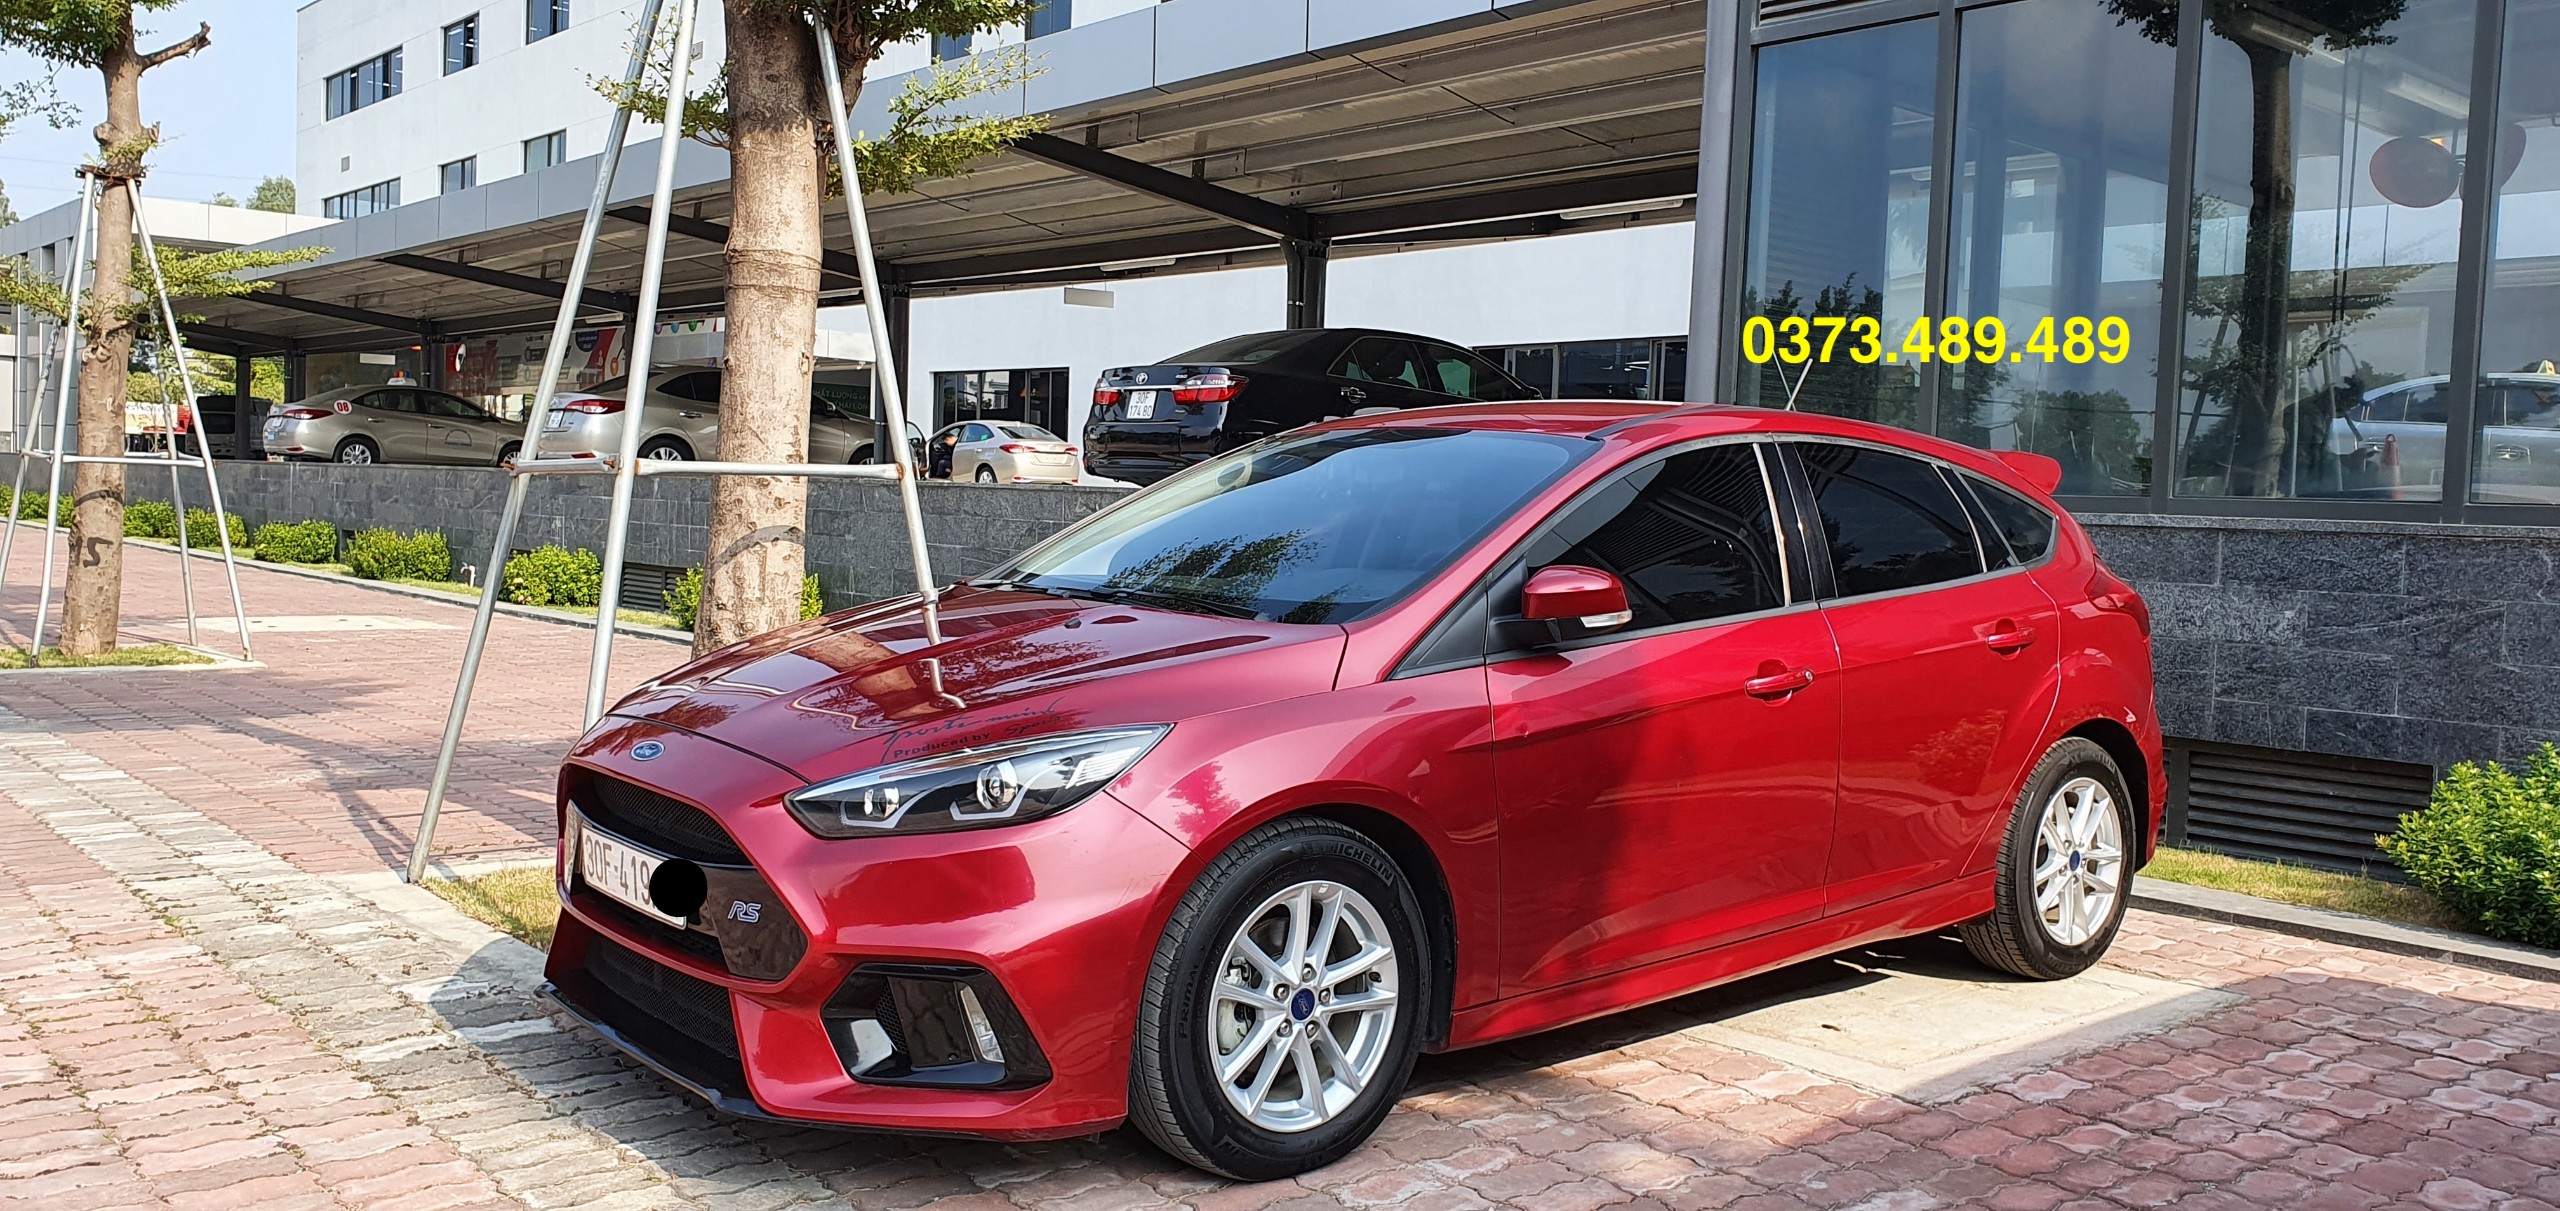 2018 Ford Focus Hatchback Review Trims Specs Price New Interior  Features Exterior Design and Specifications  CarBuzz